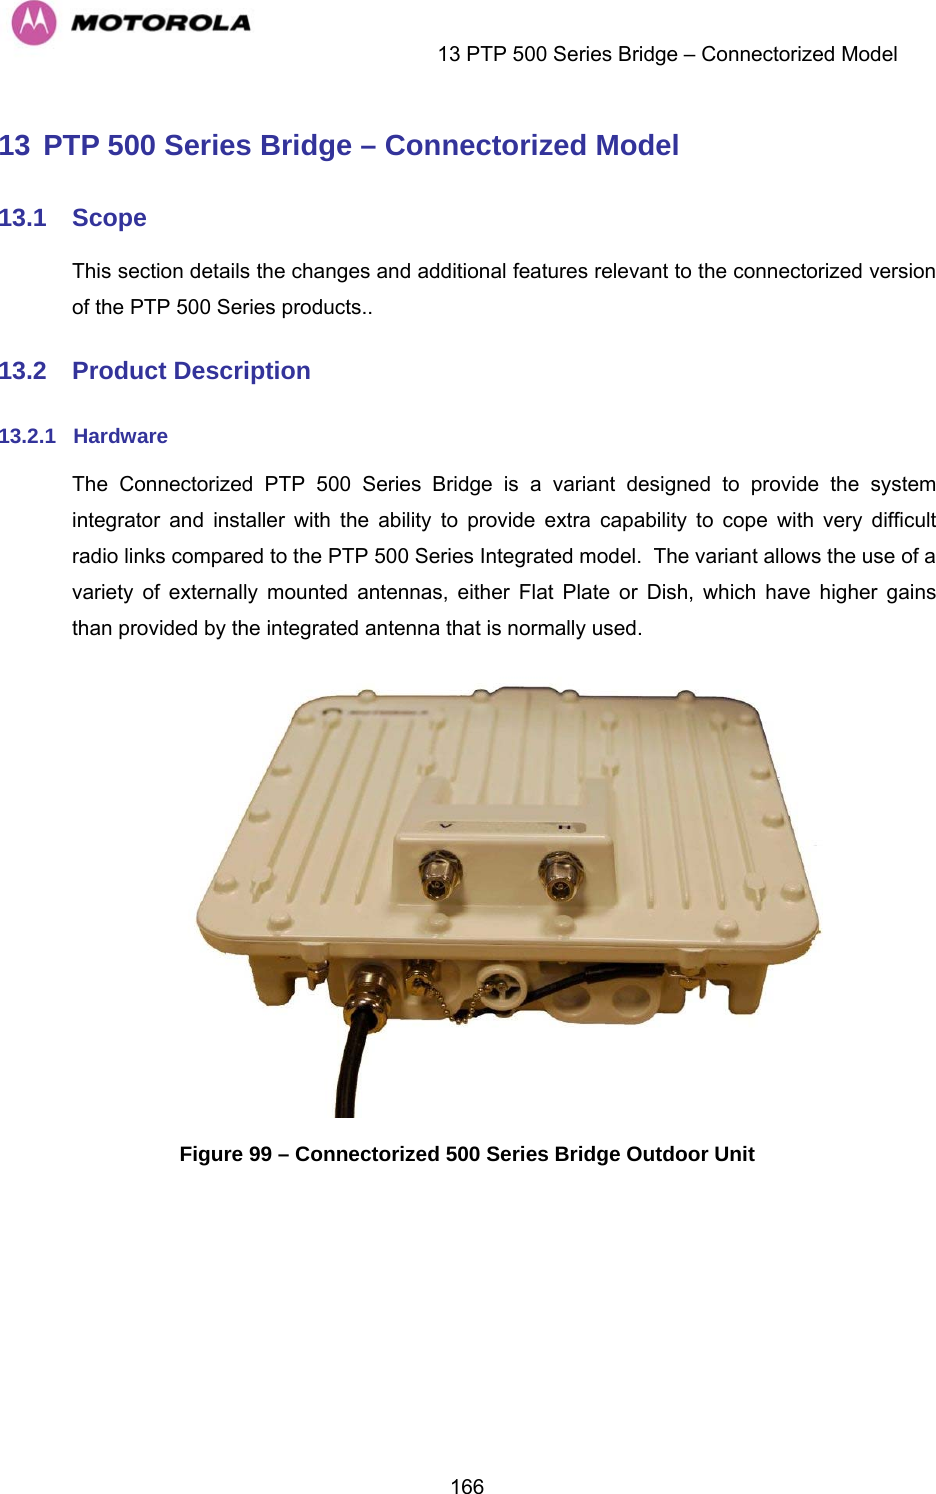    13 PTP 500 Series Bridge – Connectorized Model  16613 PTP 500 Series Bridge – Connectorized Model 13.1  Scope This section details the changes and additional features relevant to the connectorized version of the PTP 500 Series products.. 13.2  Product Description 13.2.1  Hardware The Connectorized PTP 500 Series Bridge is a variant designed to provide the system integrator and installer with the ability to provide extra capability to cope with very difficult radio links compared to the PTP 500 Series Integrated model.  The variant allows the use of a variety of externally mounted antennas, either Flat Plate or Dish, which have higher gains than provided by the integrated antenna that is normally used.  Figure 99 – Connectorized 500 Series Bridge Outdoor Unit  